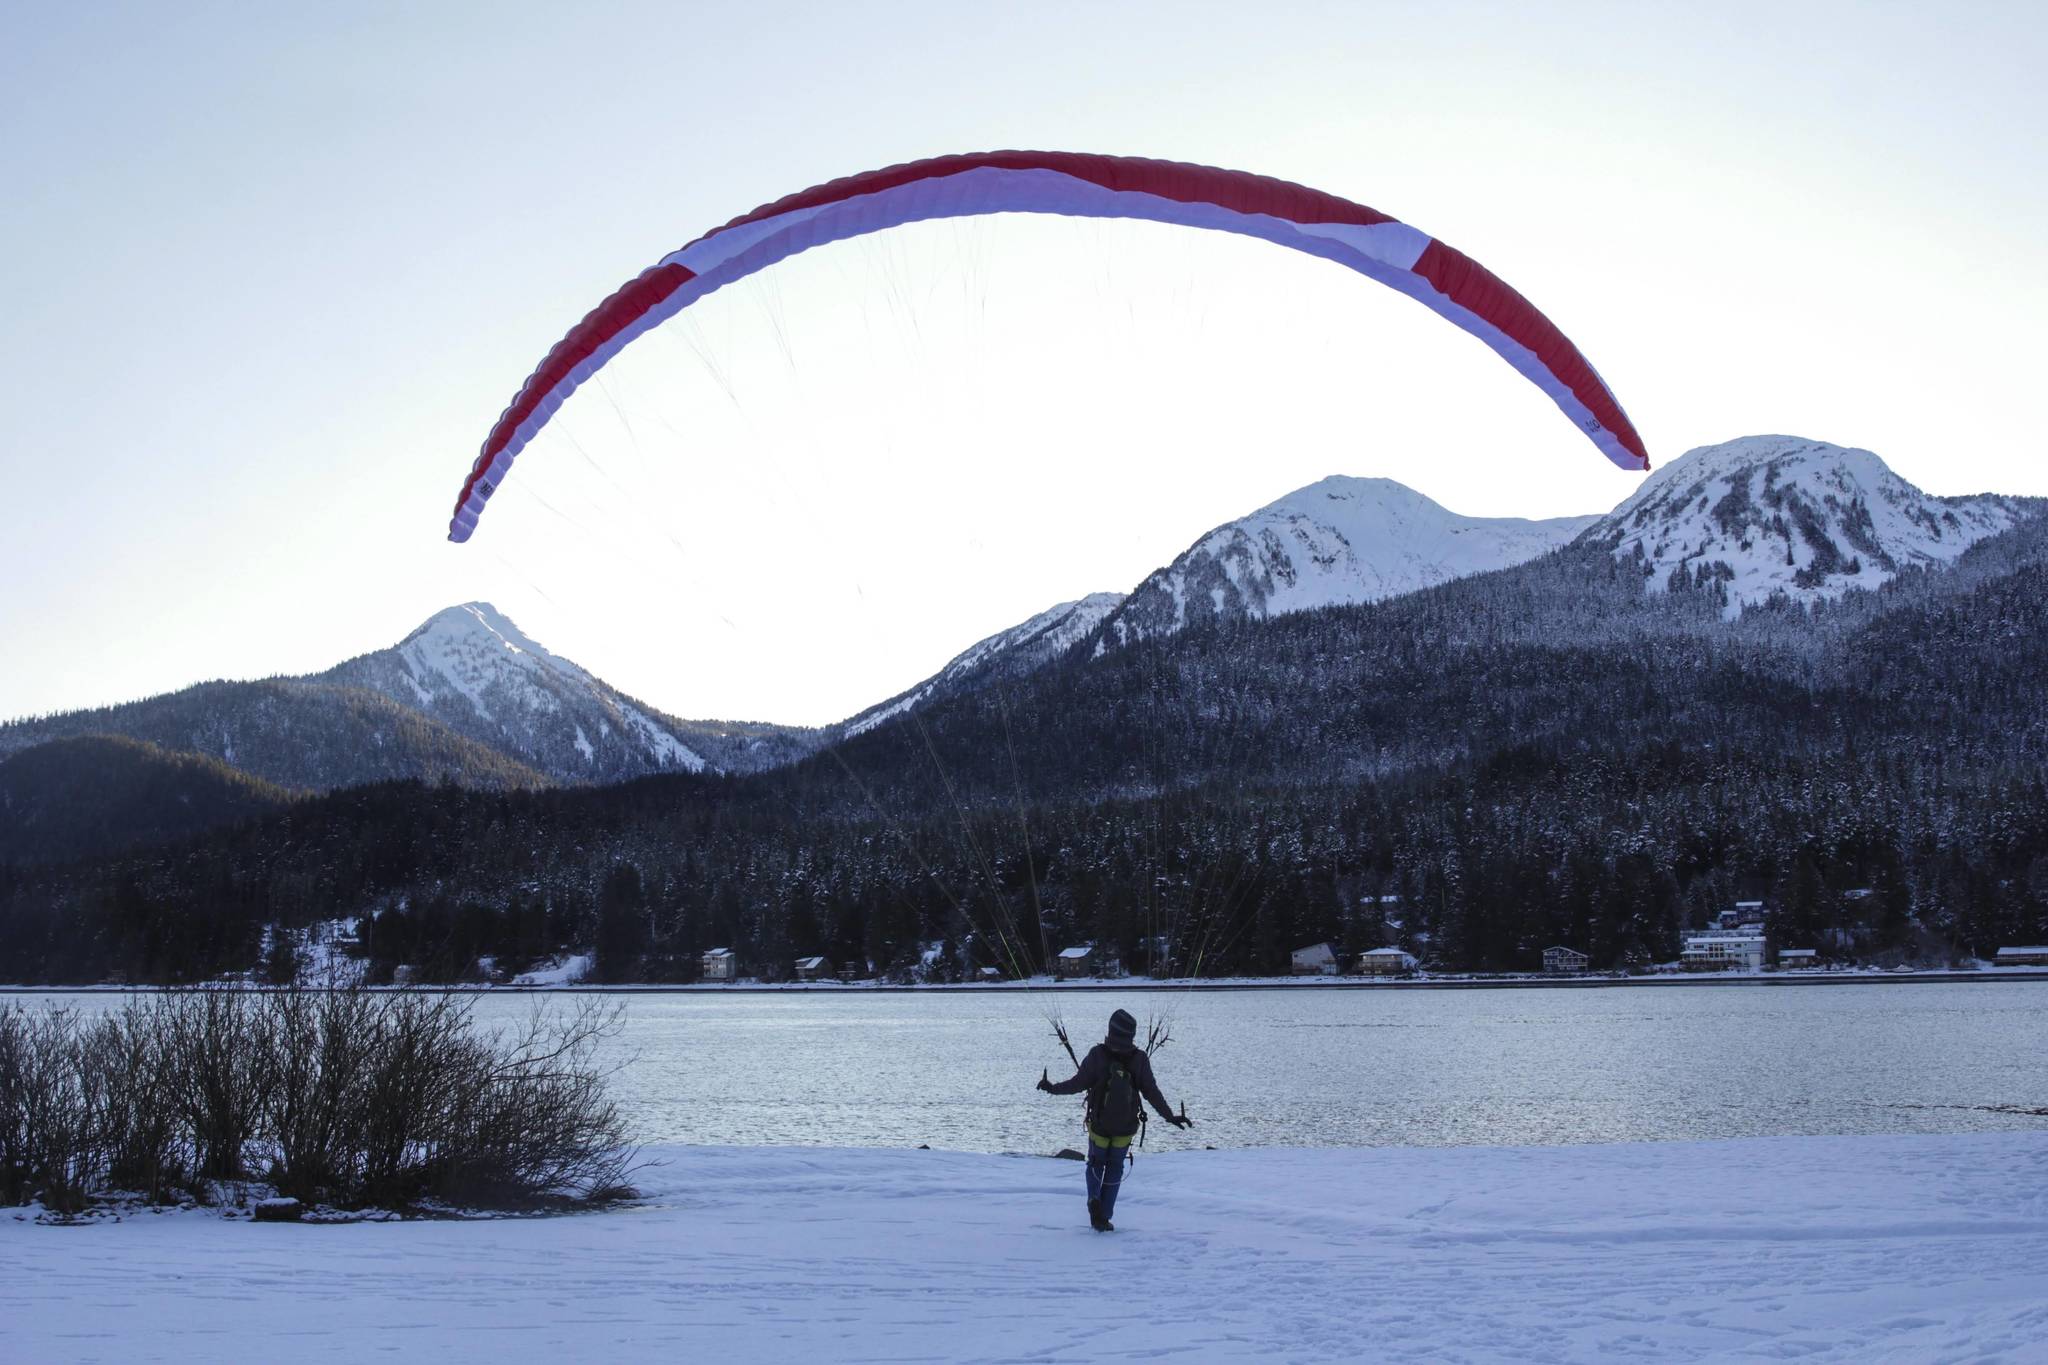 Robert Fawcett familiarizes himself with a new wing alongside the Gastineau Channel at Wayside Park on Wednesday. “When you’re up on the mountain, you get more variables, more winds and gusts,” Fawcett said in a brief interview. “The same controls you use in the air, you use on the ground. It’s always good to practice.” Fawcett said he’d taken the wing off a mountain on Monday. “I like the hike up,” Fawcett said. “I don’t like the hike down.”